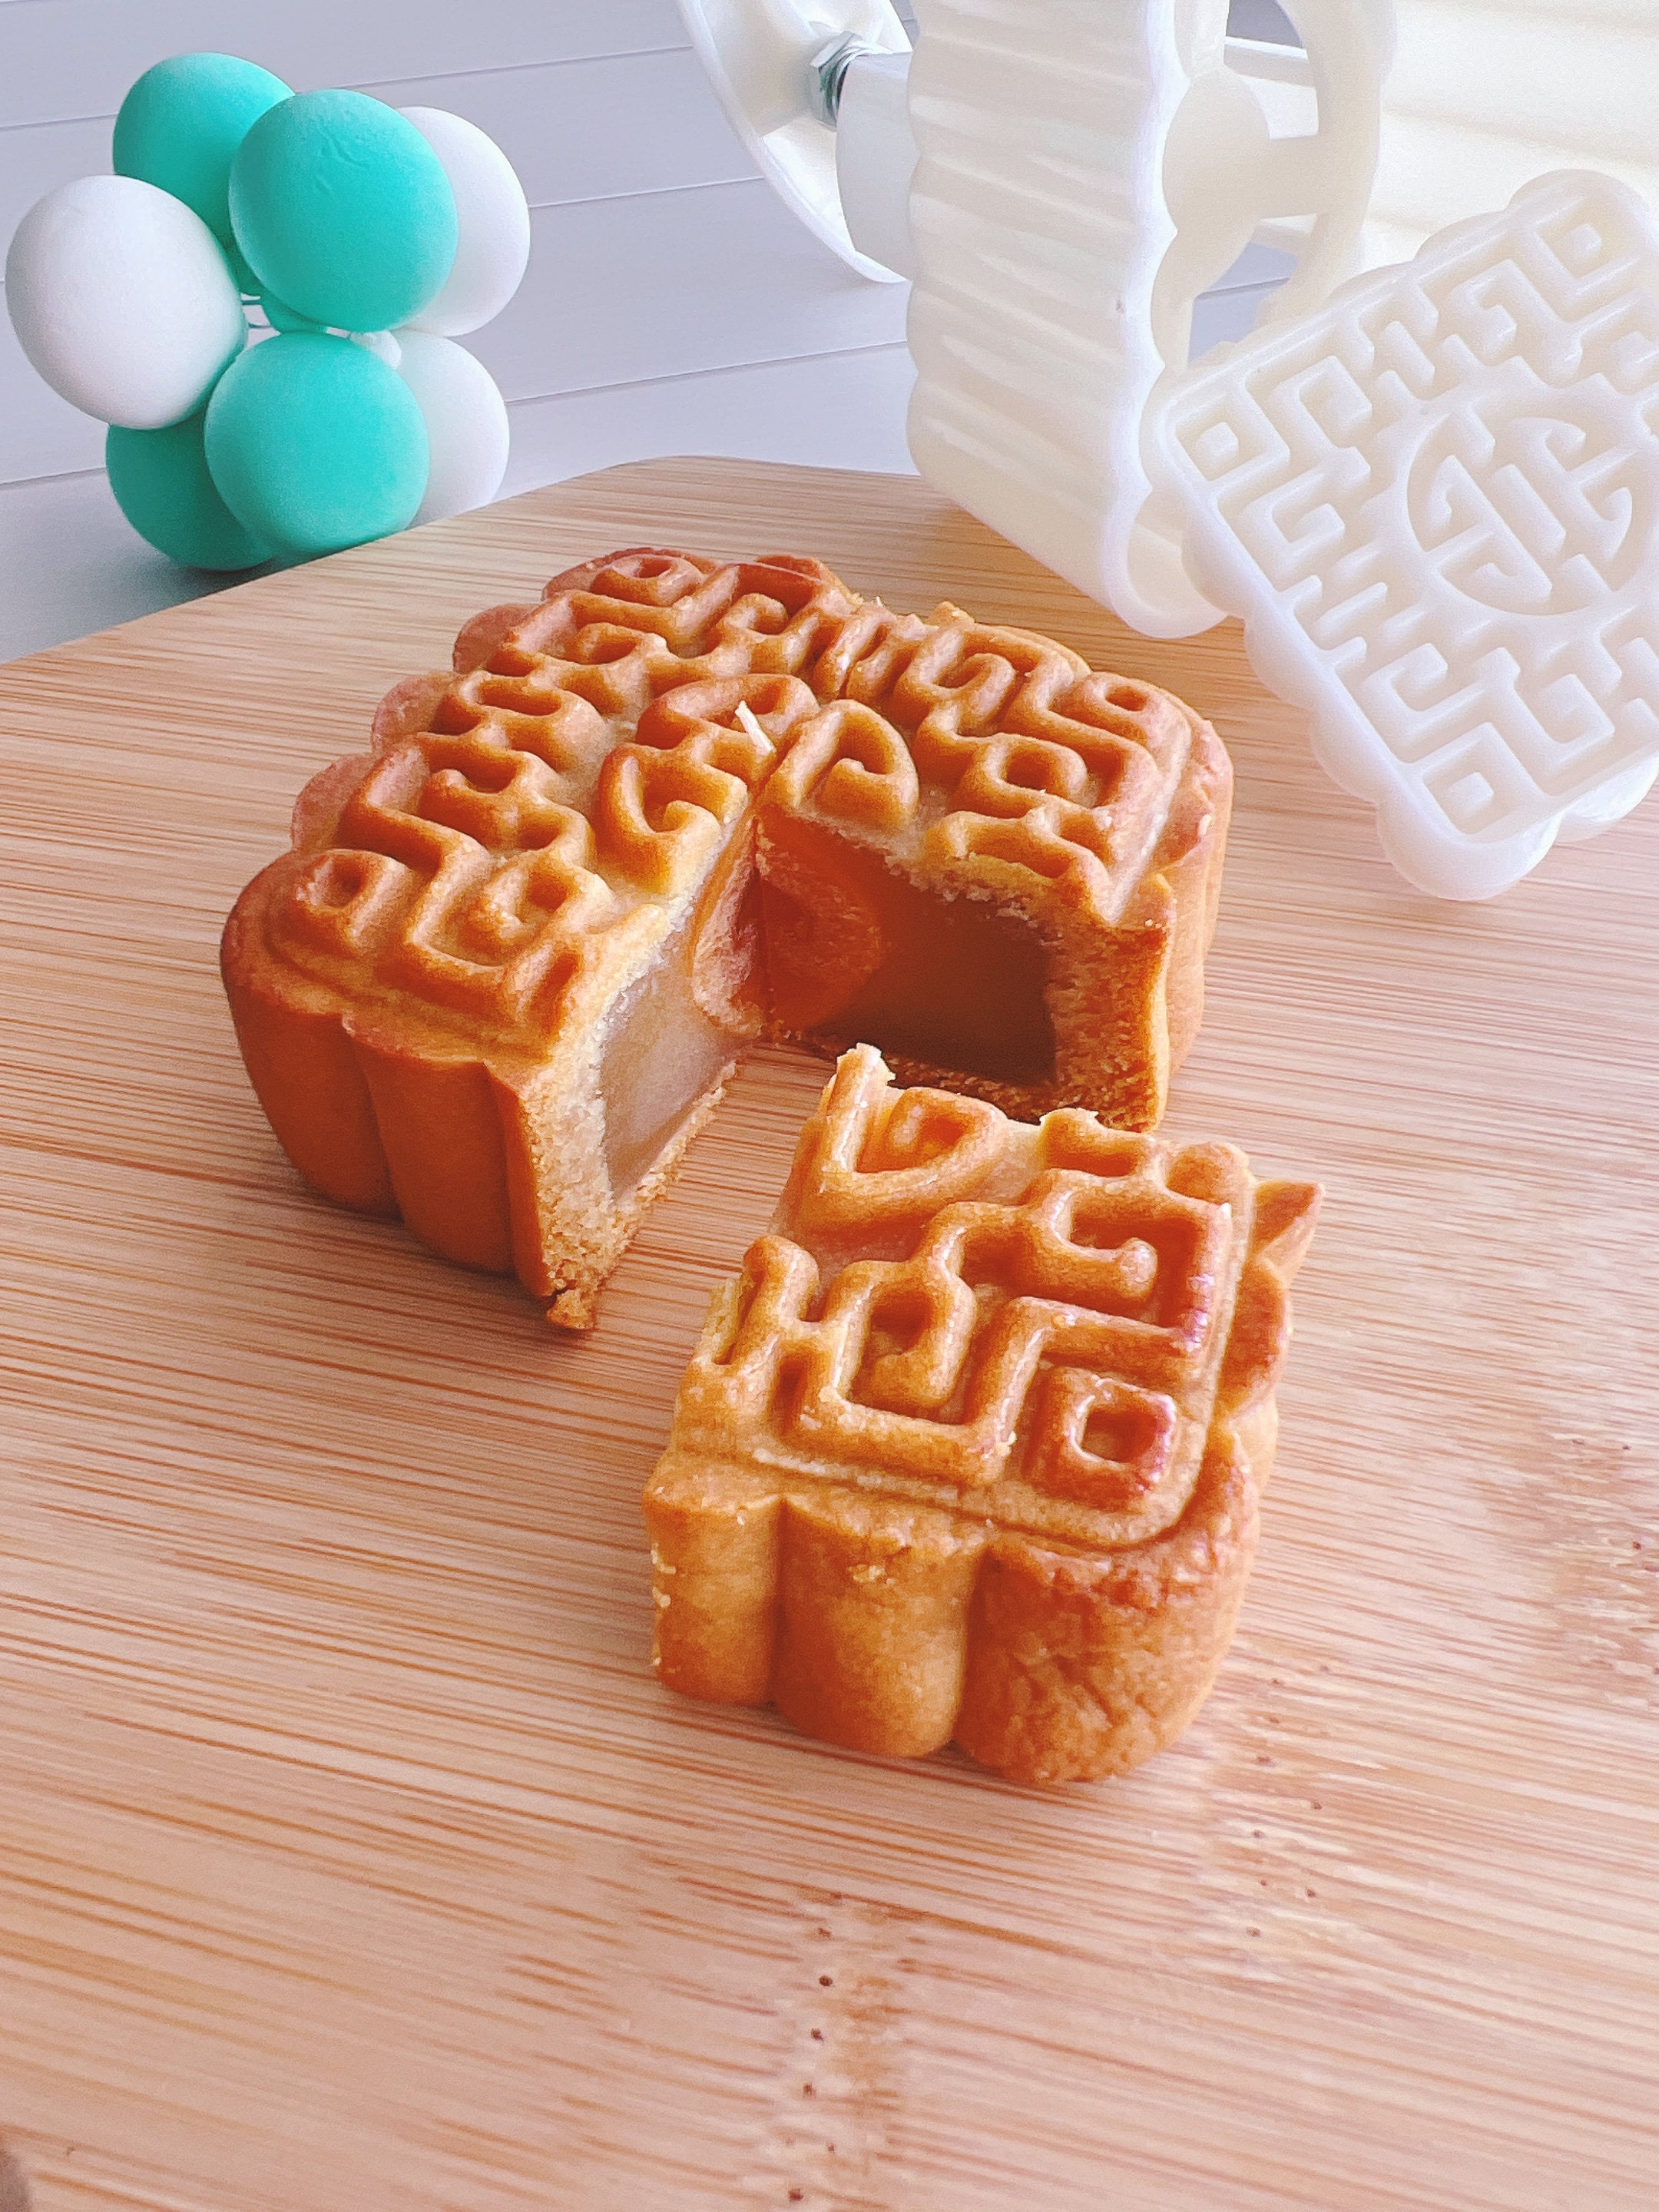 Traditional Asian Chinese Mooncakes filling with Mooncake Paste and Salted Egg Yolk 亚洲中国传统手工月饼